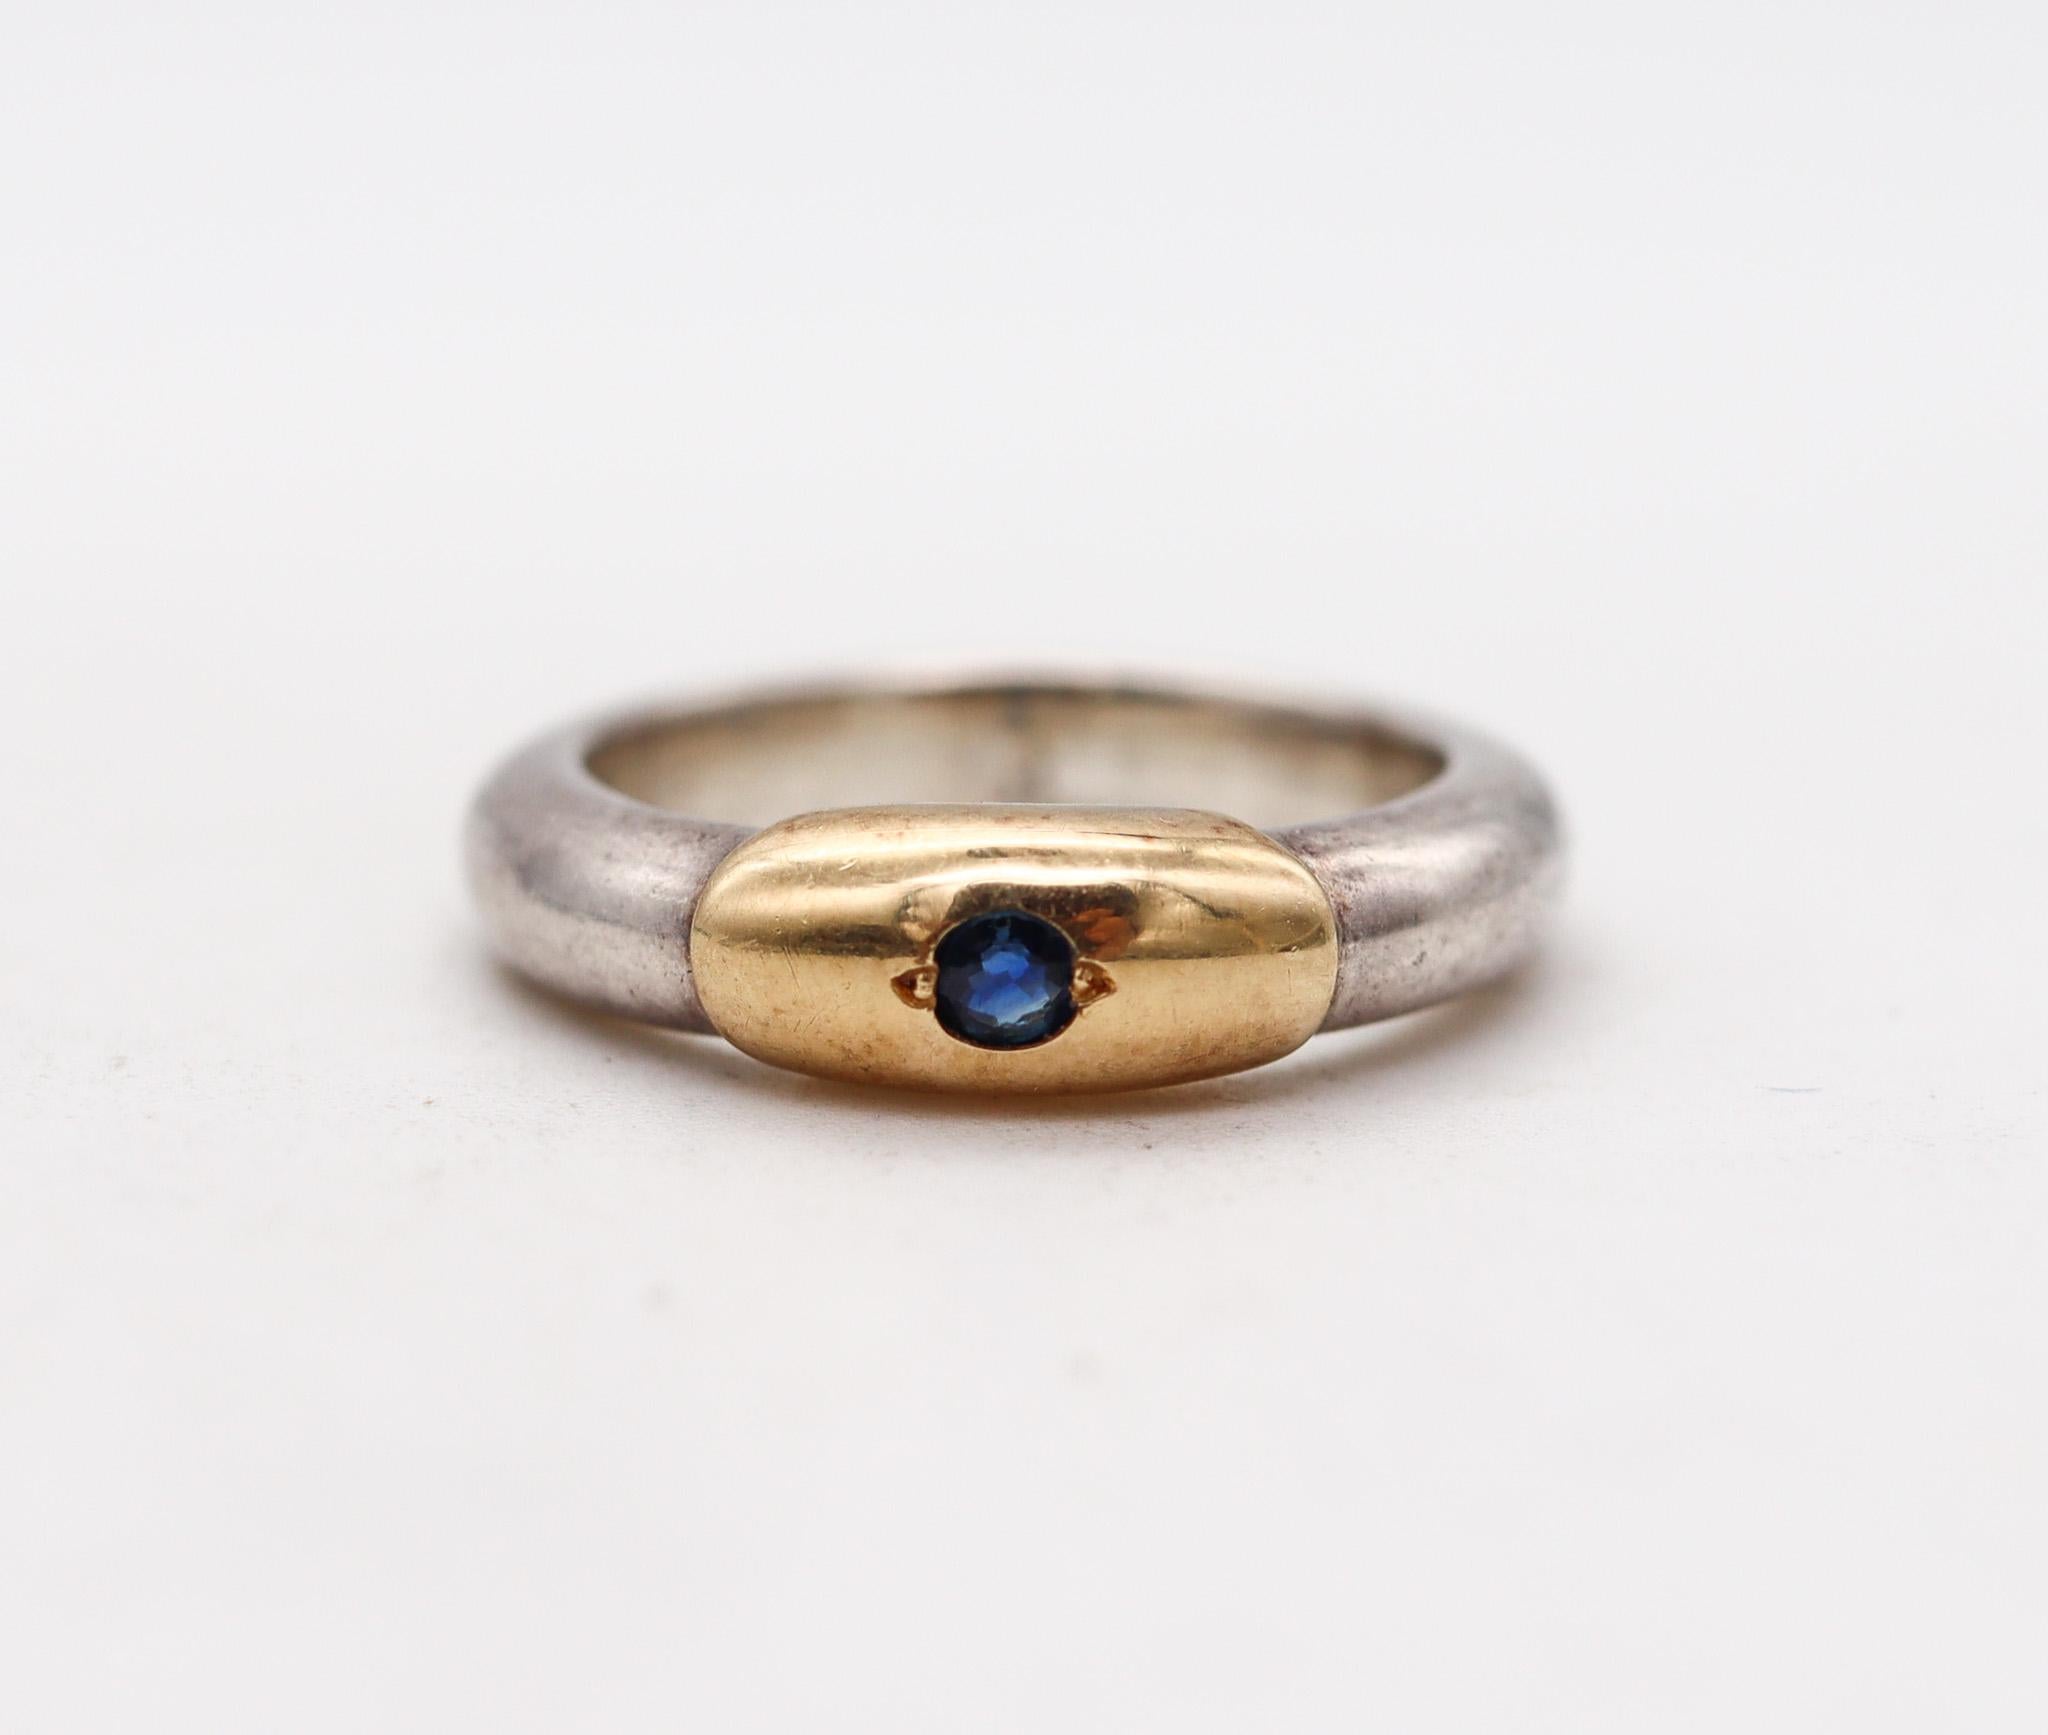 Modernist Lalaounis 1970 Greece Band Ring in 18kt Yellow Gold & Sterling with Sapphire